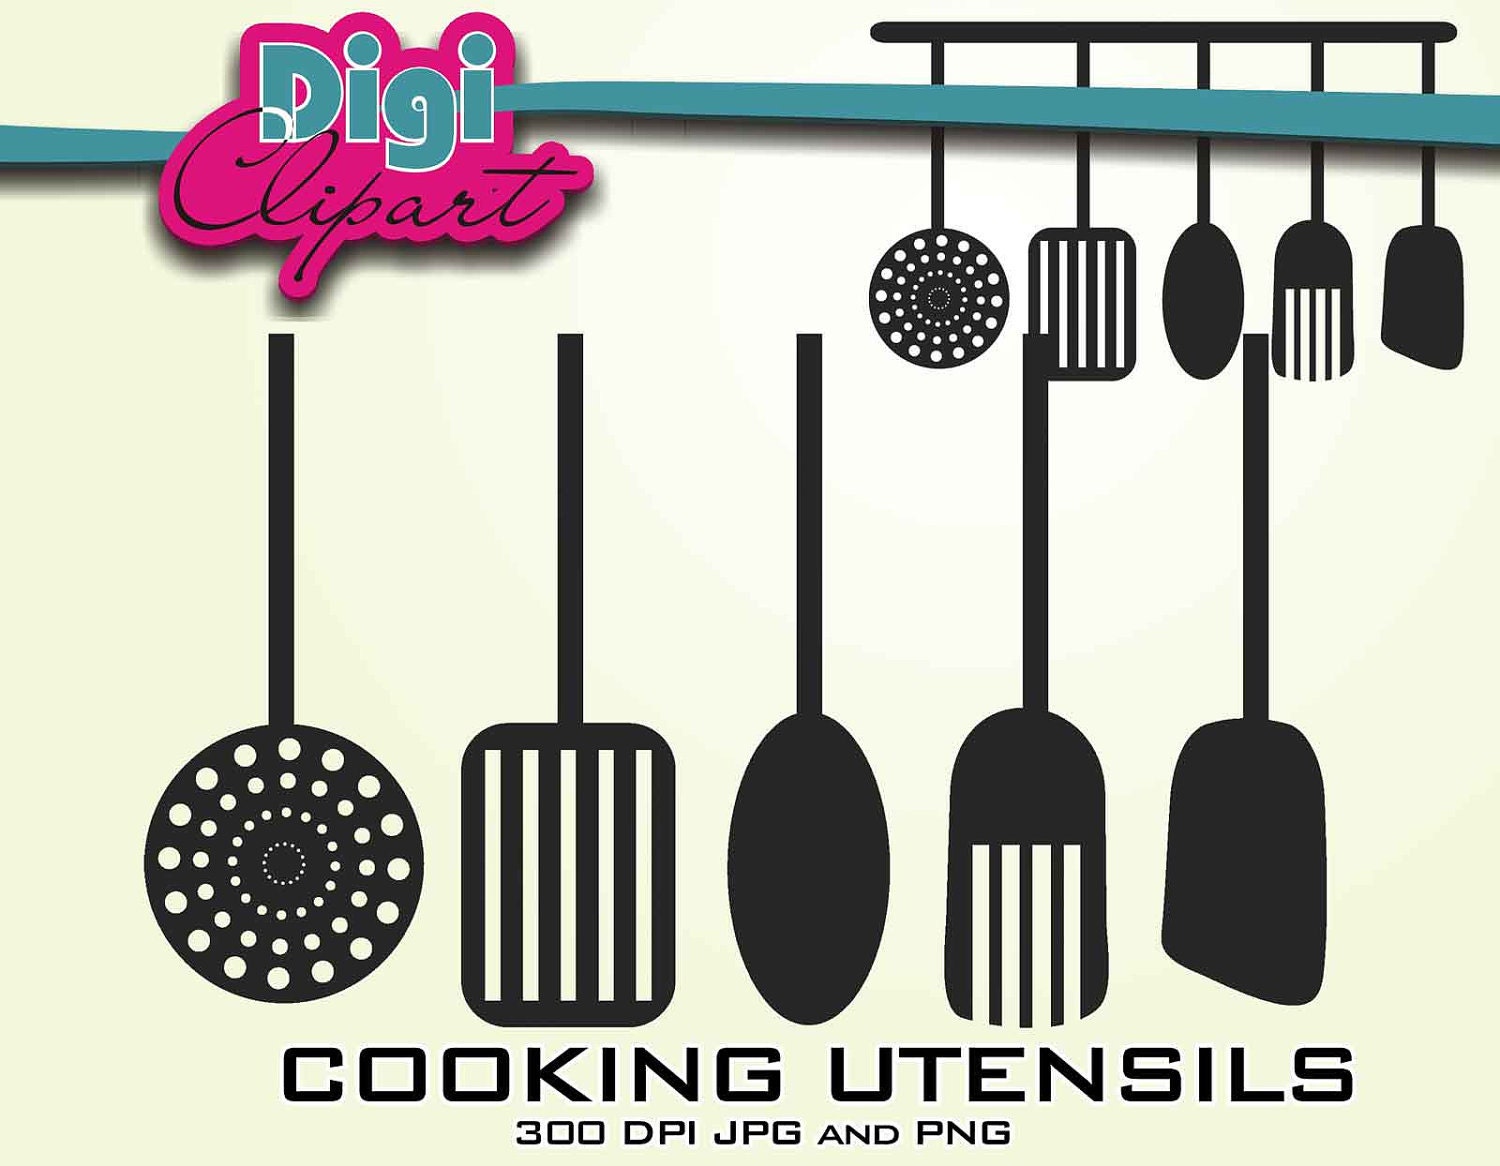 clipart of cooking utensils - photo #9